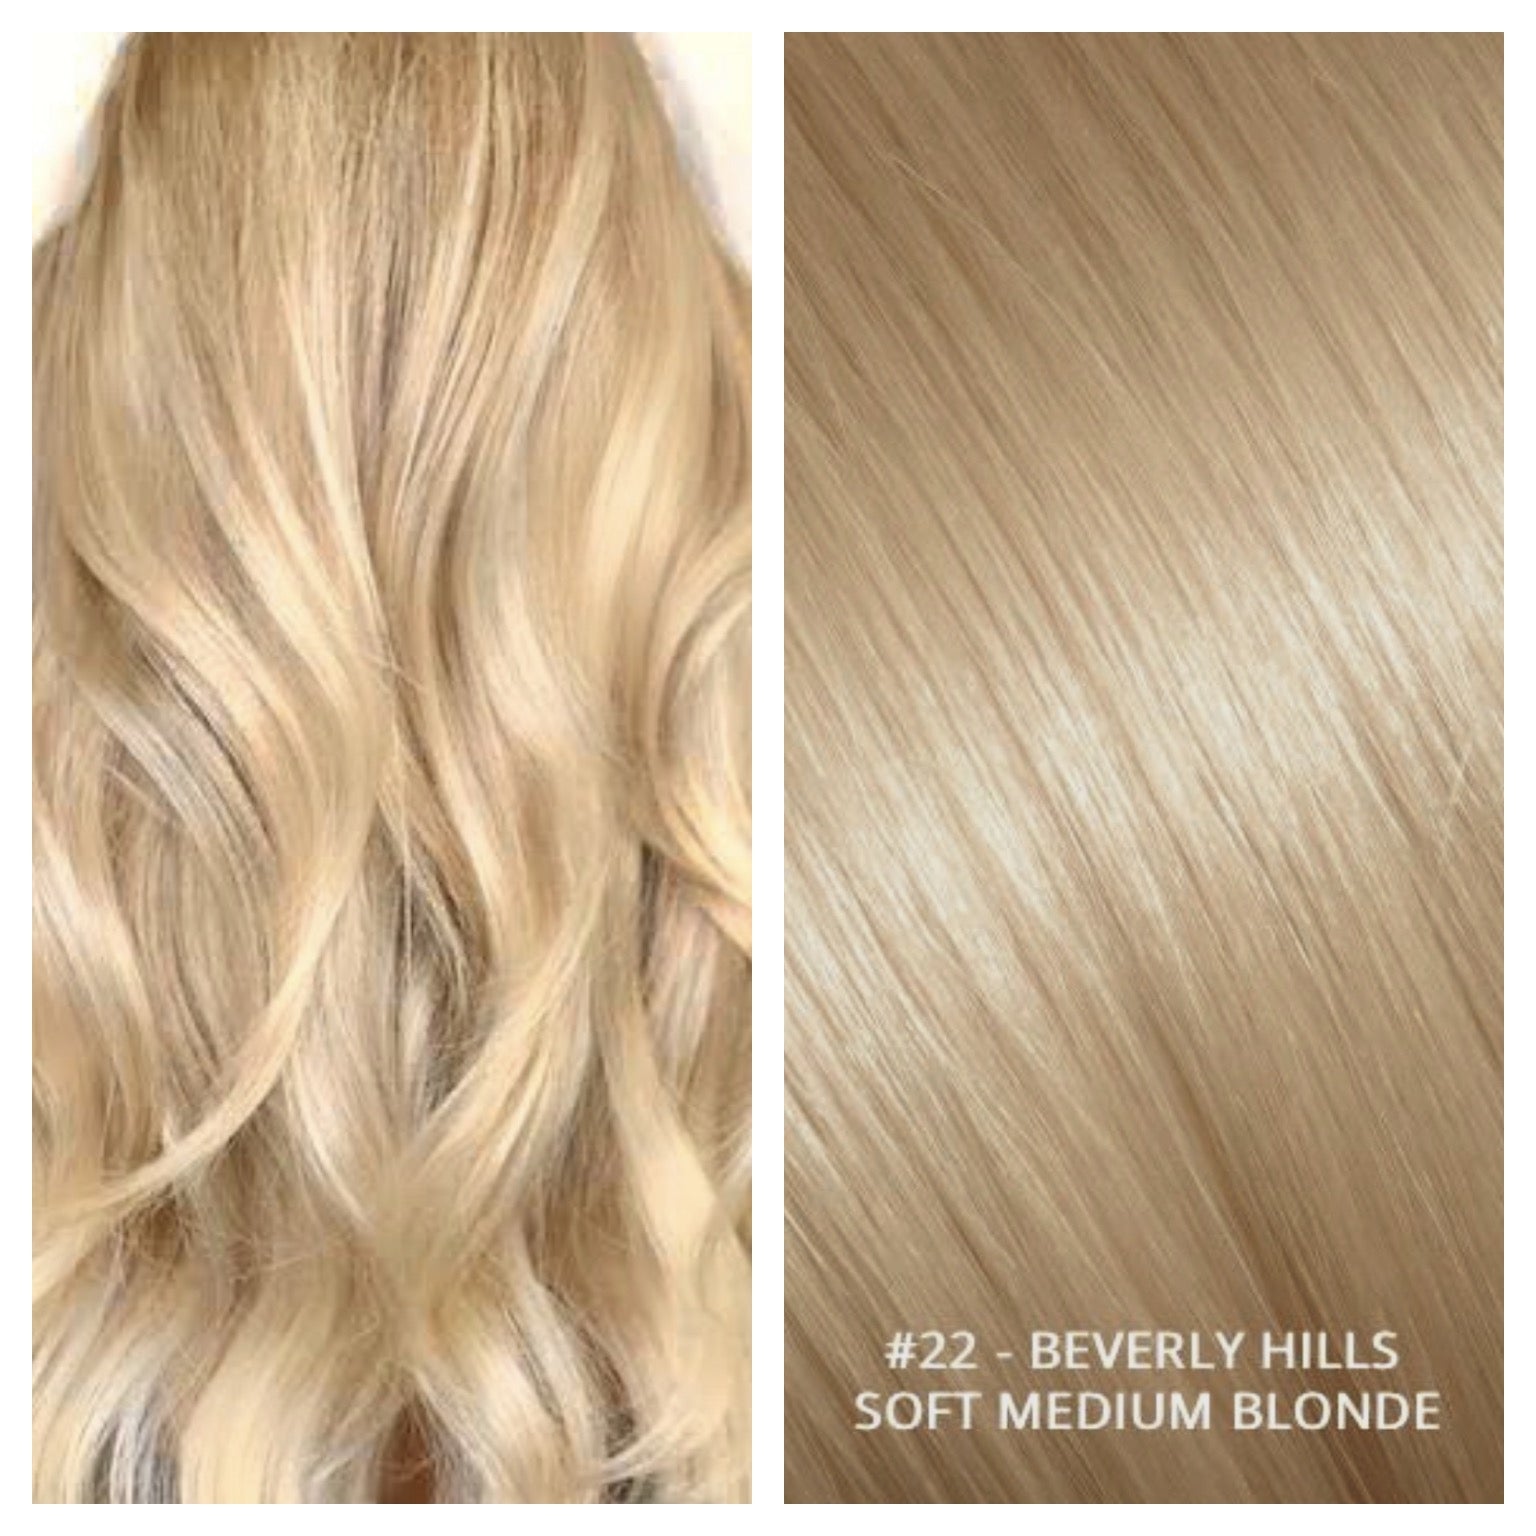 RUSSIAN CLIP IN HAIR EXTENSIONS #22 - BEVERLY HILLS - SOFT MEDIUM BLONDE